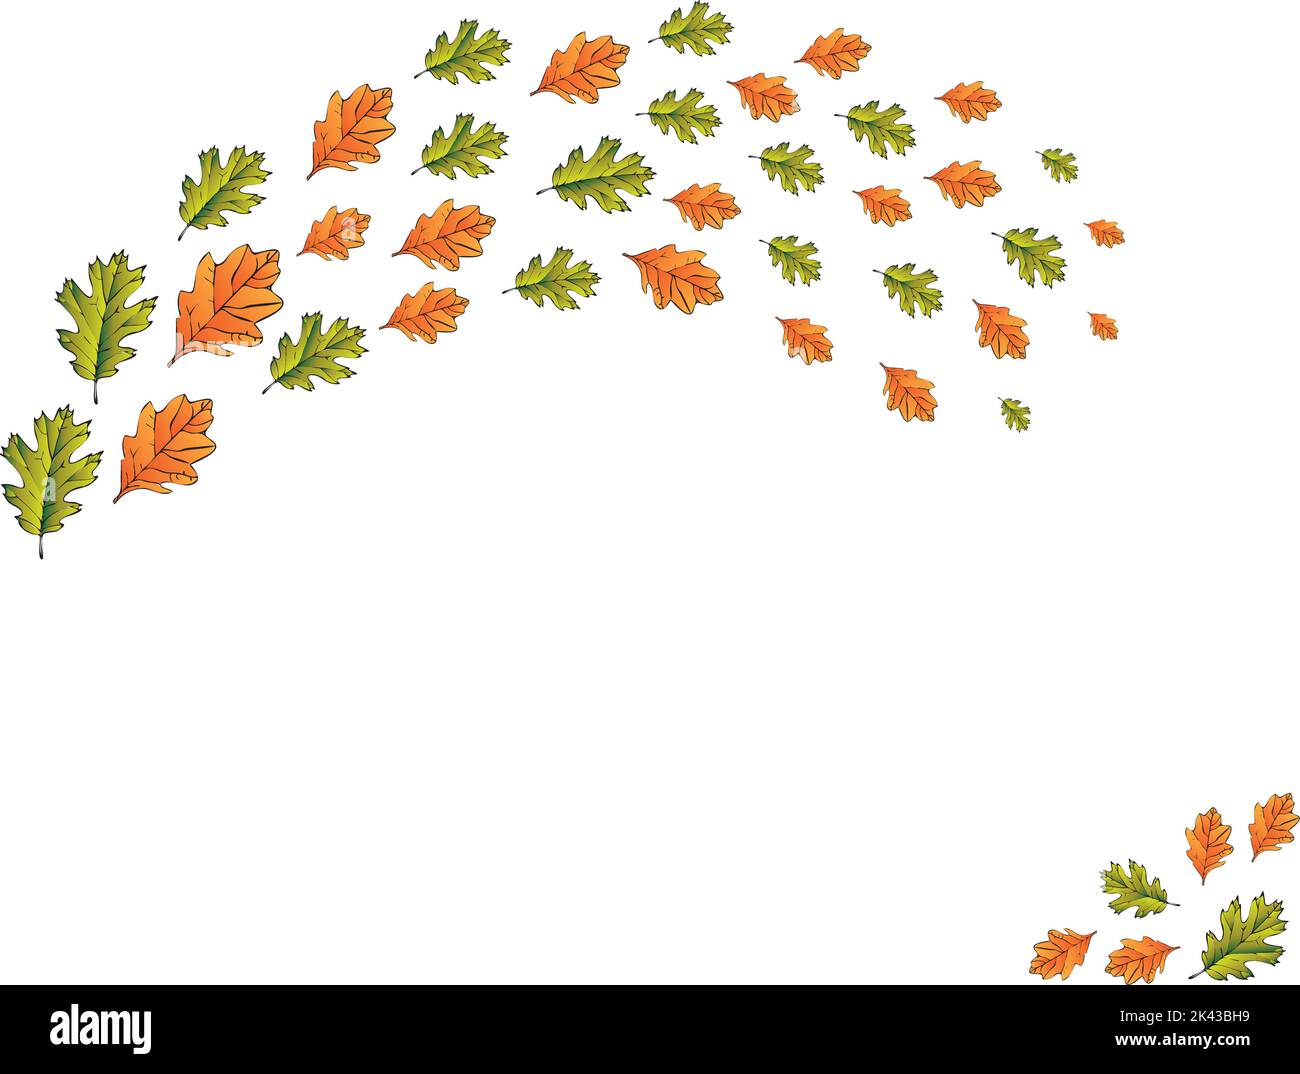 Fall leaves flying around paper as a border Stock Vector